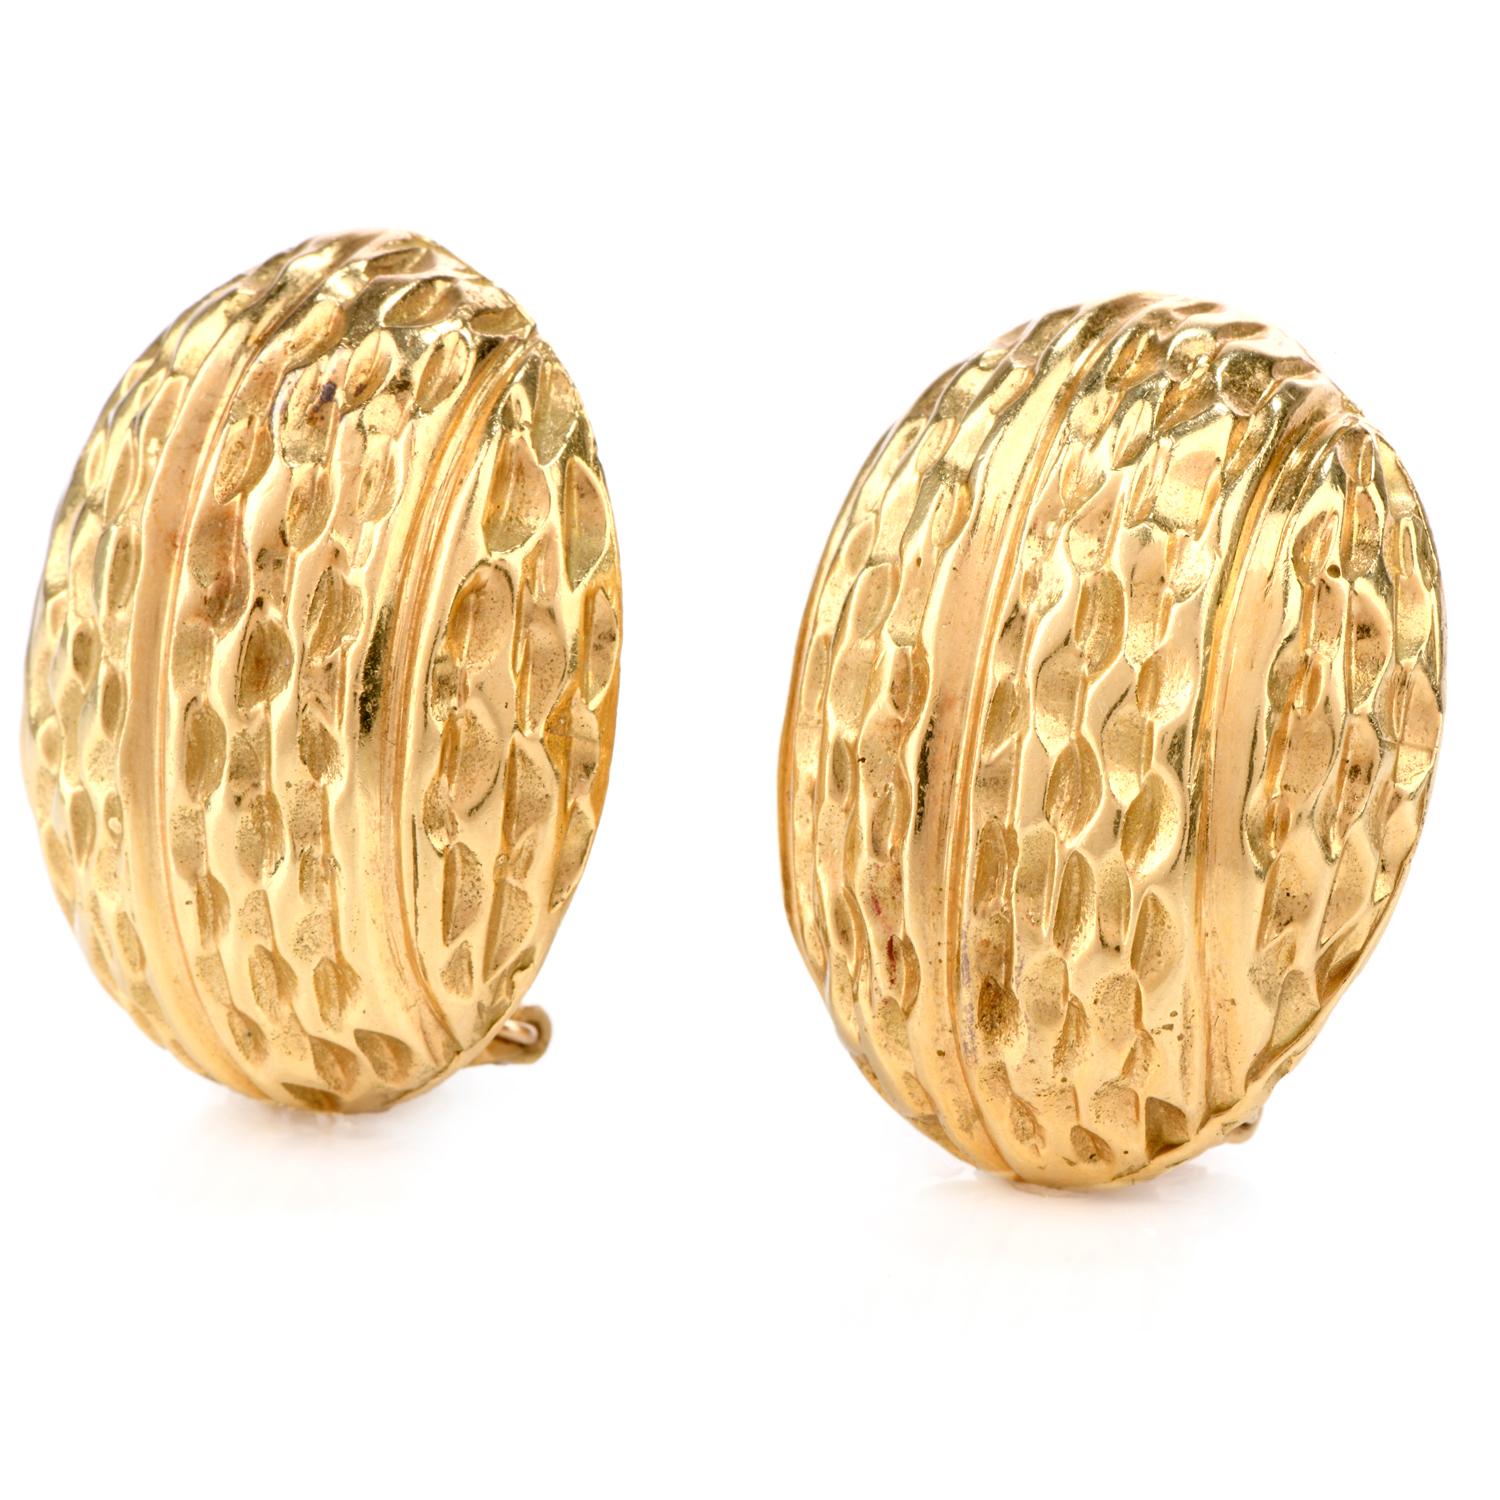 These incredible 18K gold Earrings was inspired in shell motif. The ribbing of the shell design boasts a high polished hammered effect creating depth and interest. The earrings utilize clip on backs without post.( post can be added )

Measurements 